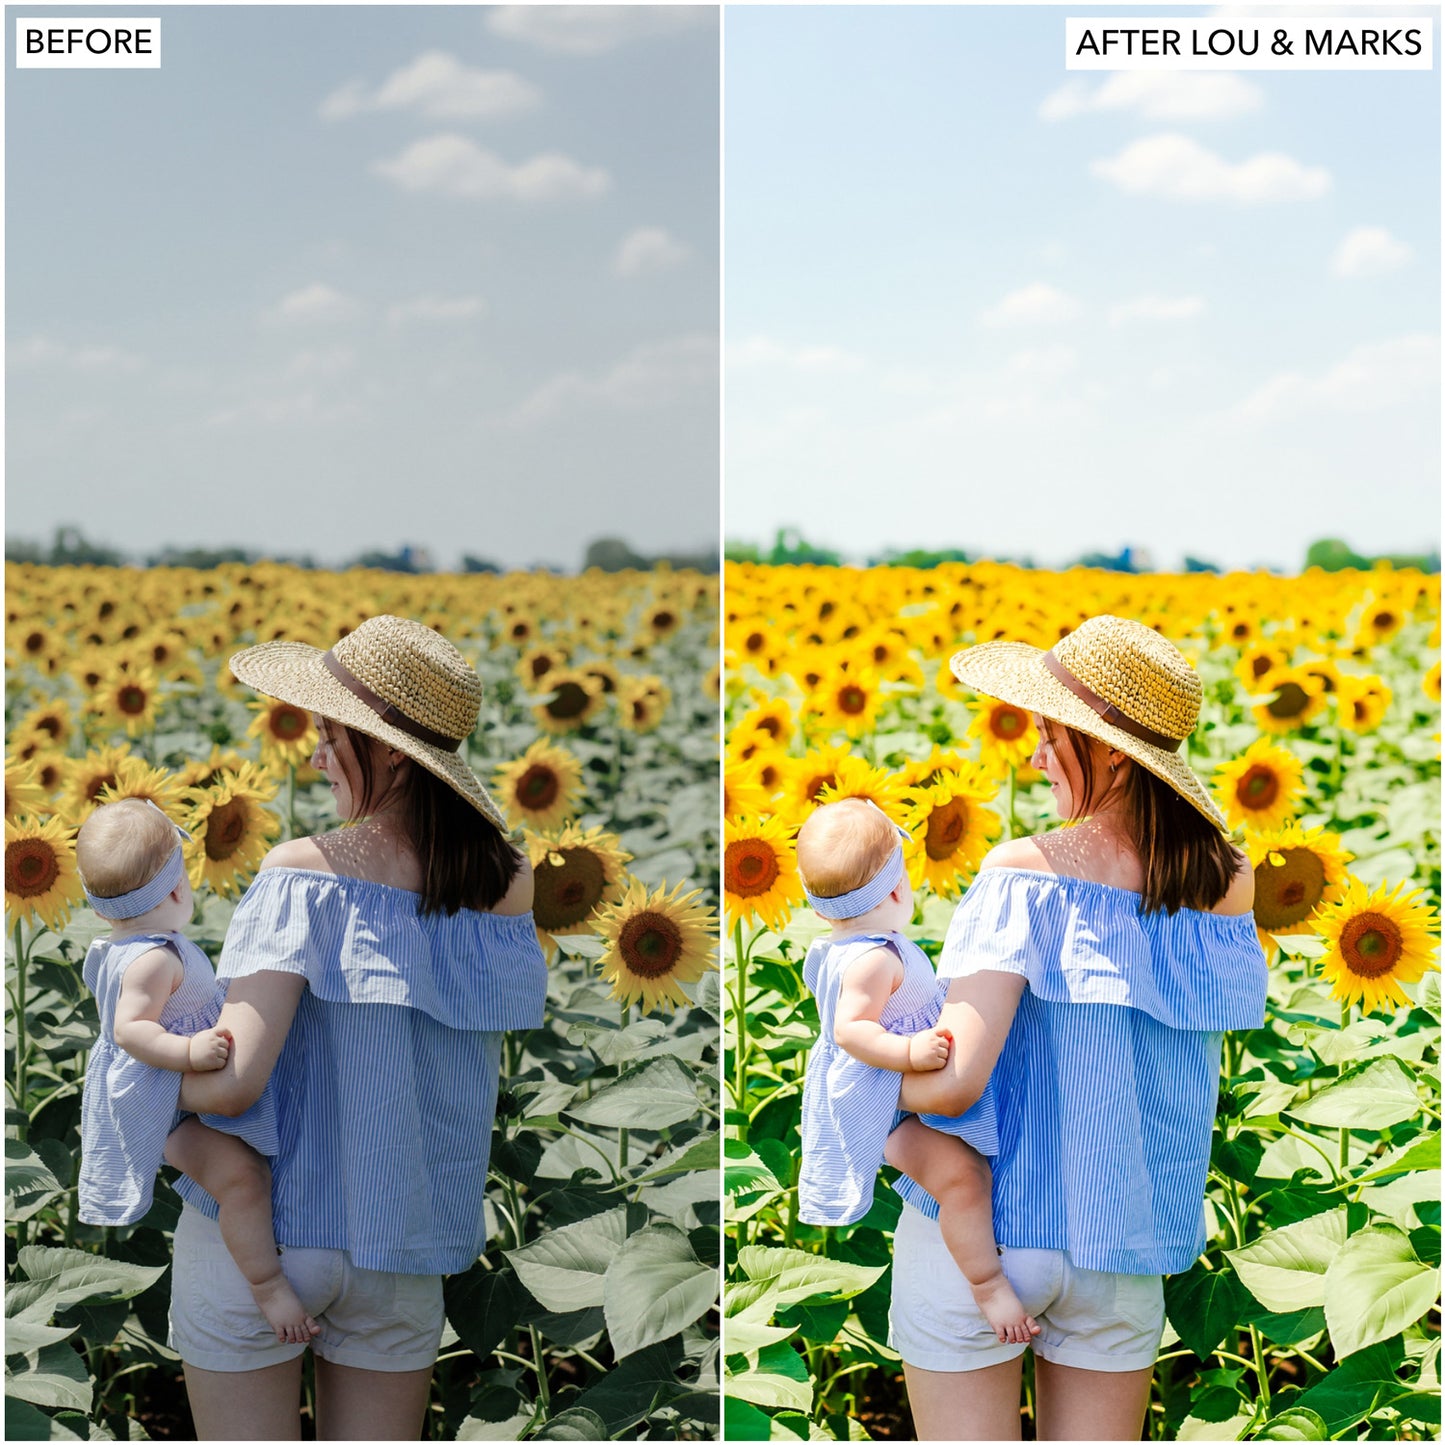 Load image into Gallery viewer, Sunflower Presets
